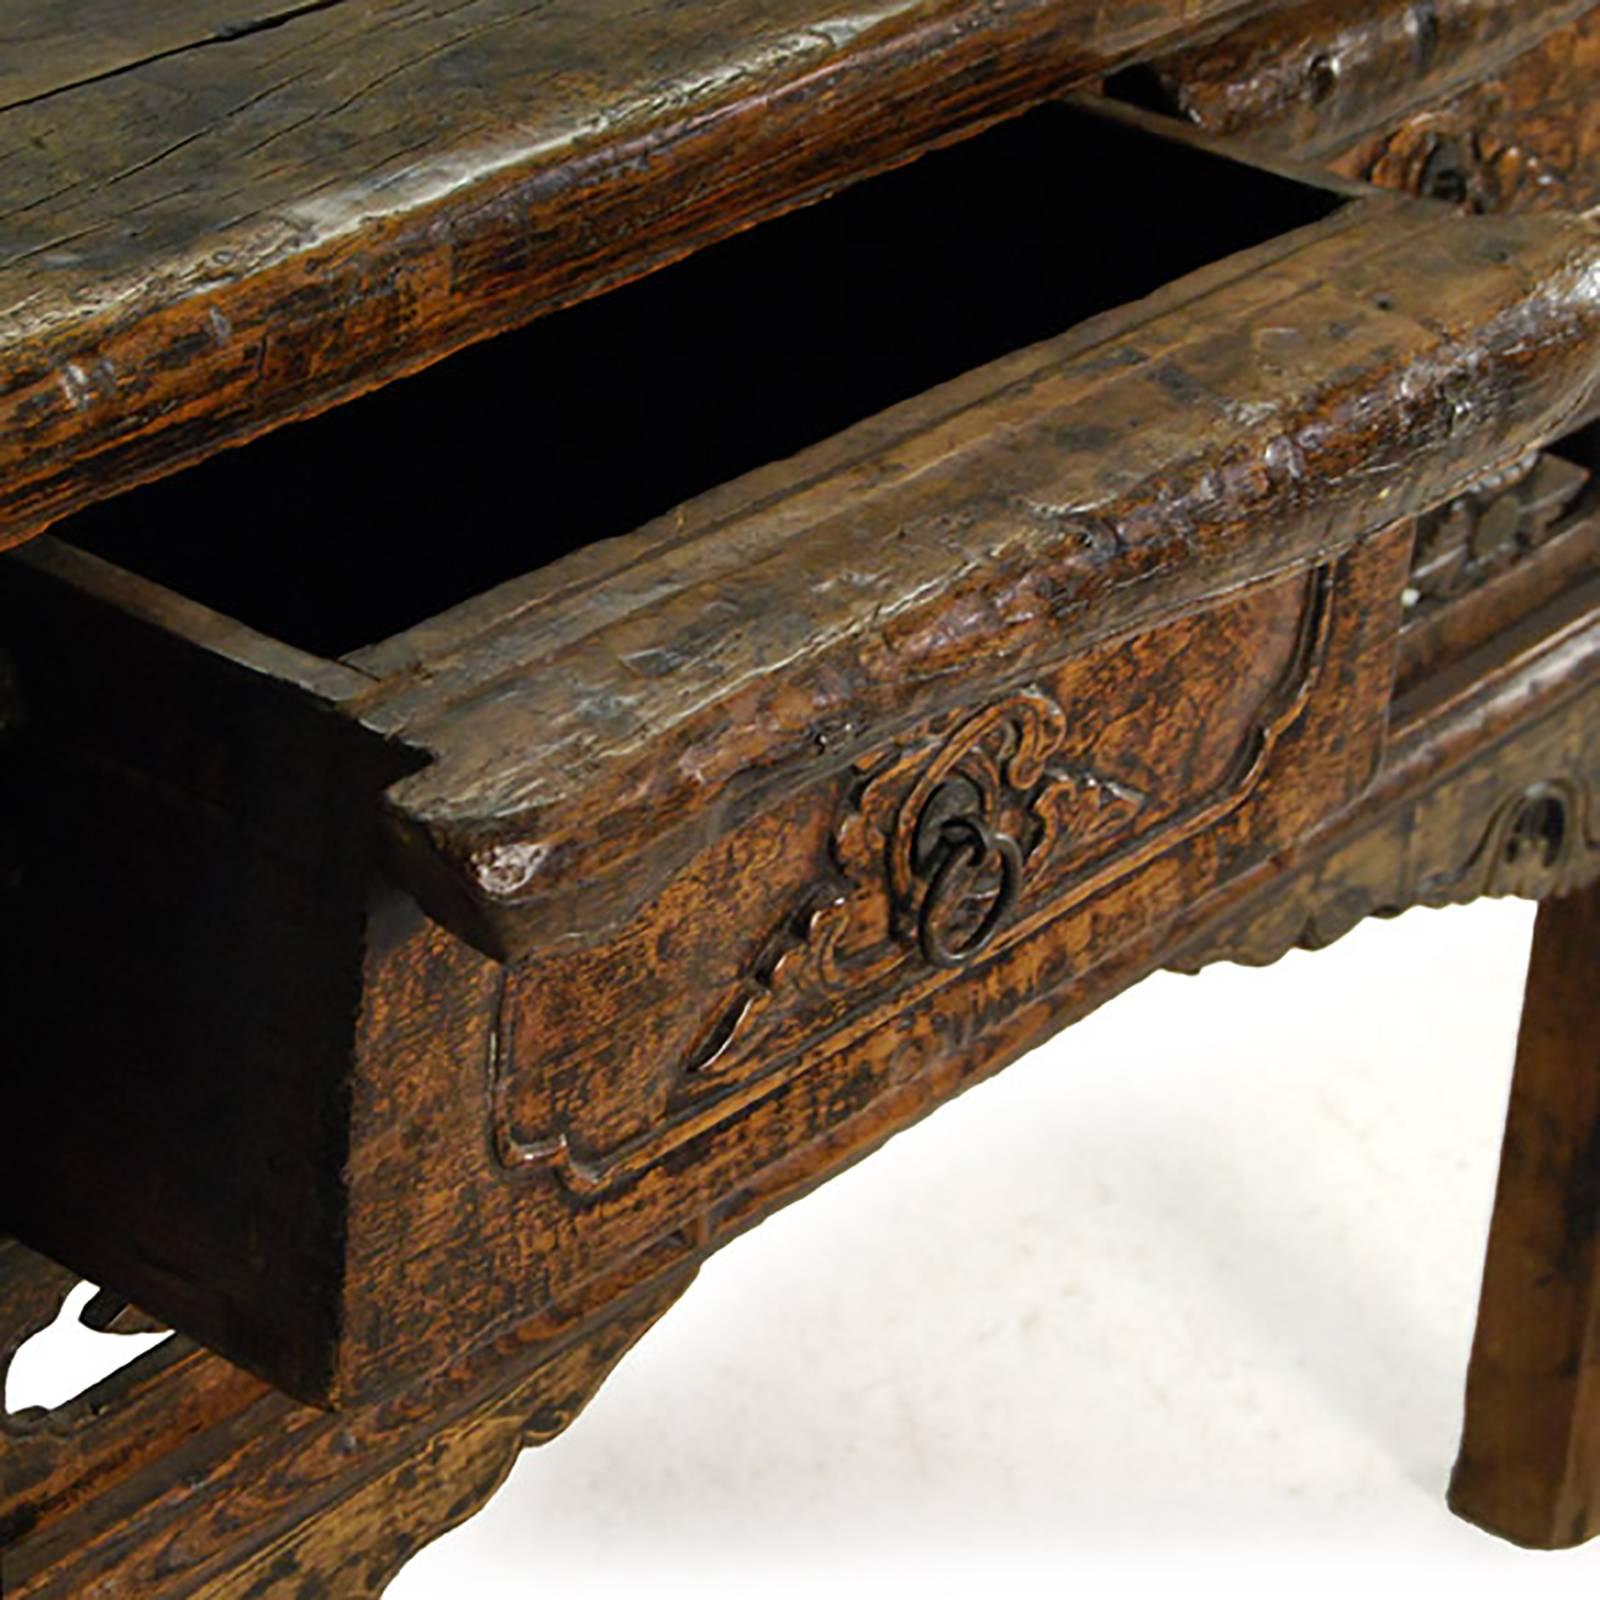 There are two drawers made of burled elmwood cleverly hidden in the apron of this 19th century. Provincial incense table, carved in an ornate archaic style and likely used to hold incense. The table maintains a wonderful spirit, with a beautifully